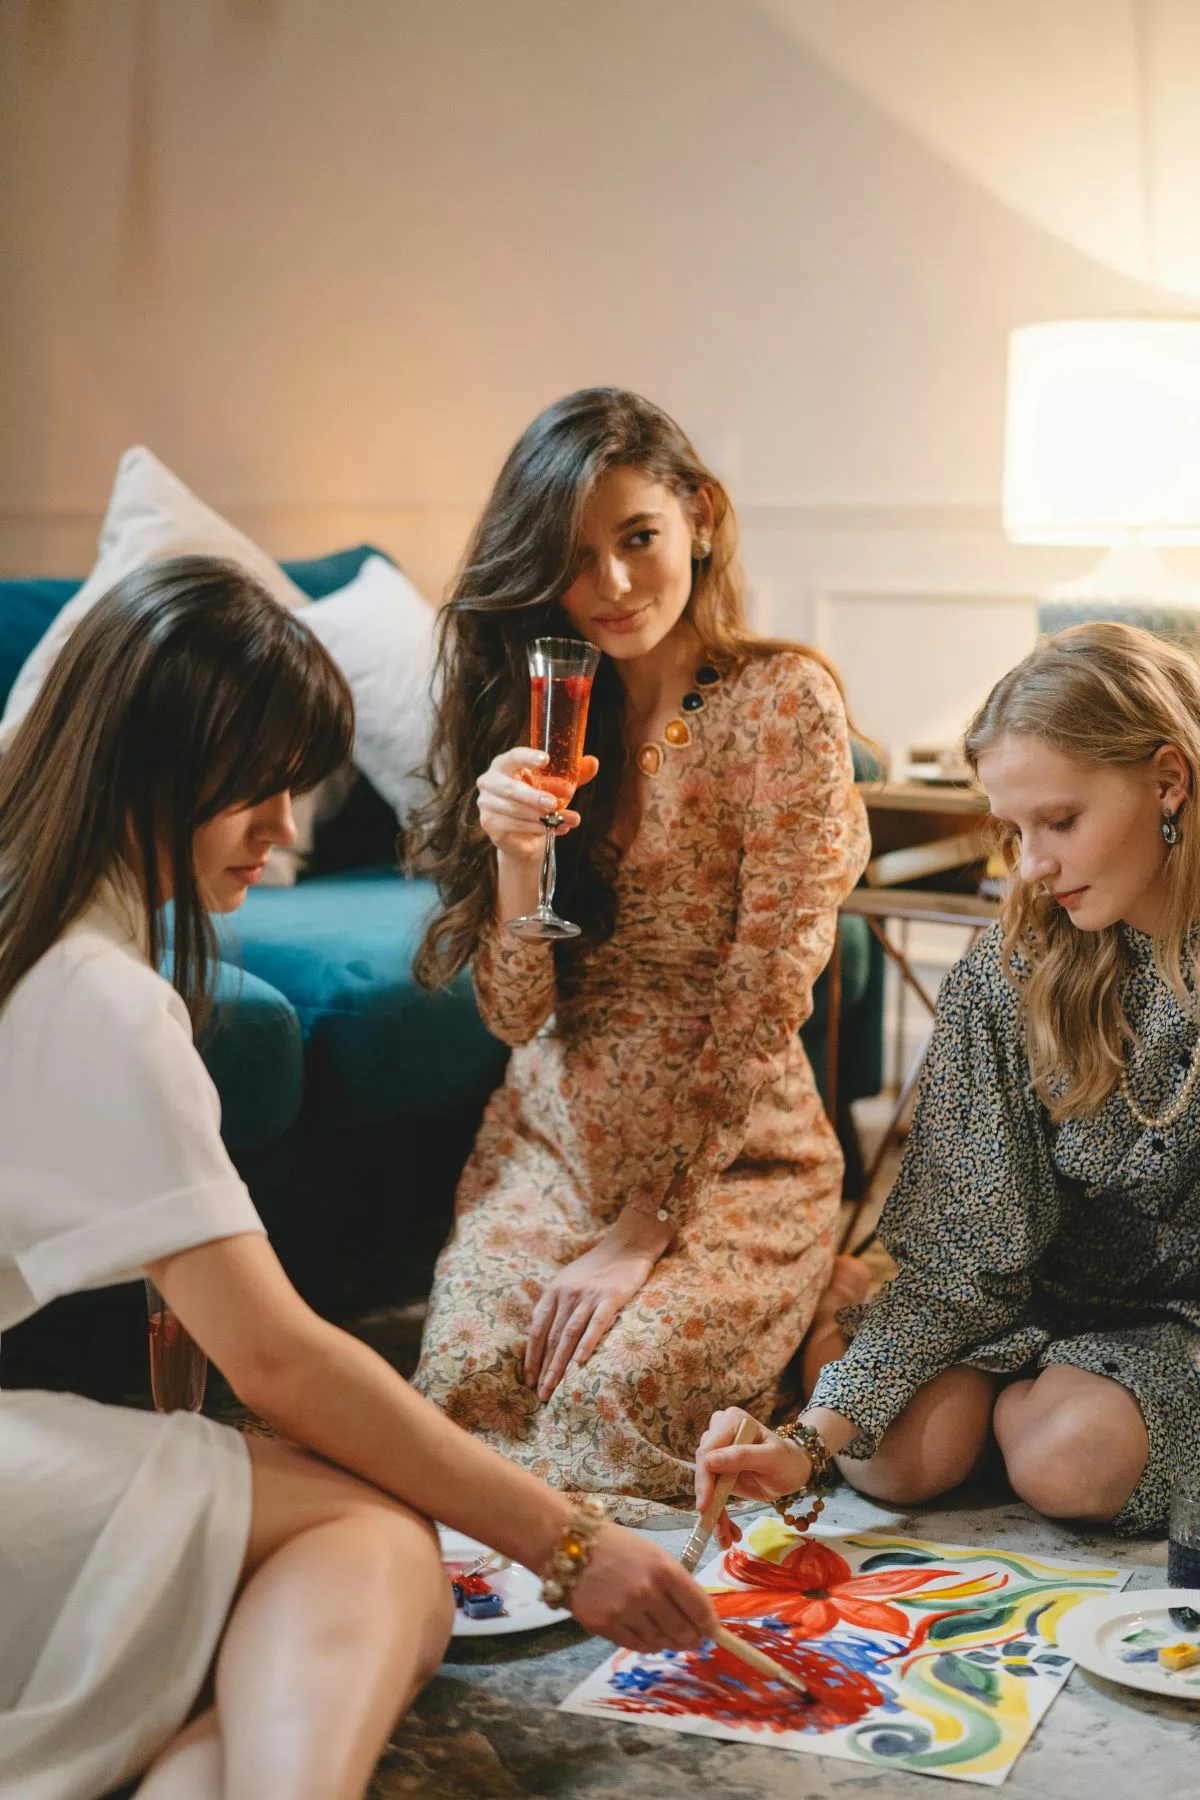 Game Ideas for Your Next Girls Night In